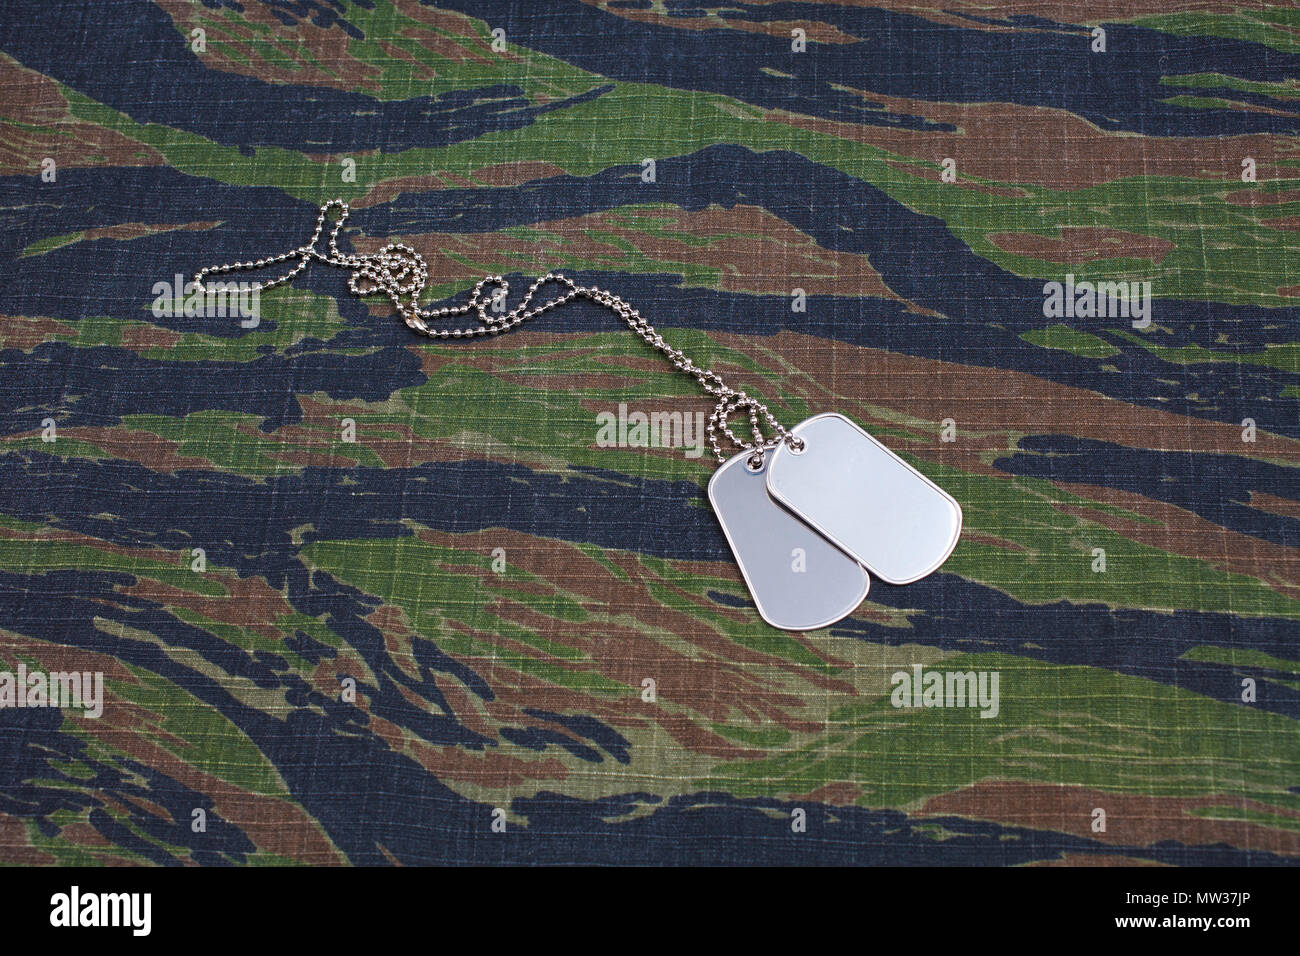 us army tiger stripe camouflaged uniform with blank dog tags background Stock Photo